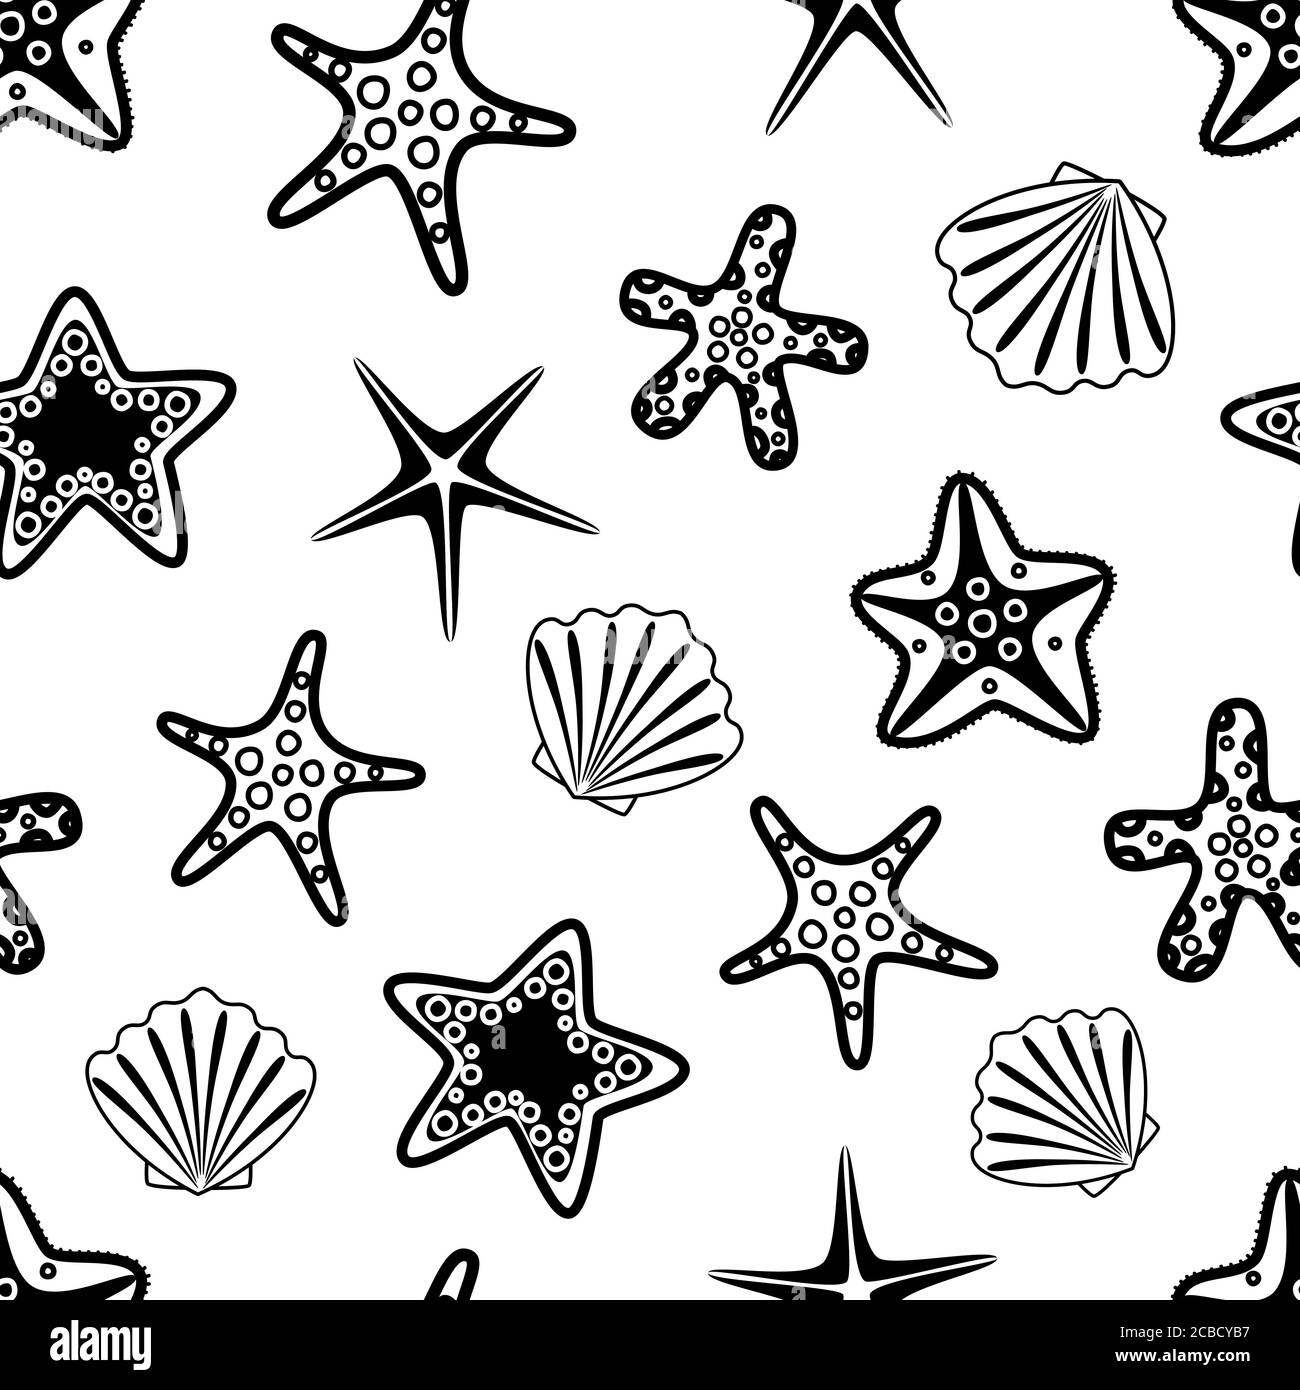 Seamless pattern with black seashells and starfishes. Underwater background. Vector illustration. Stock Vector